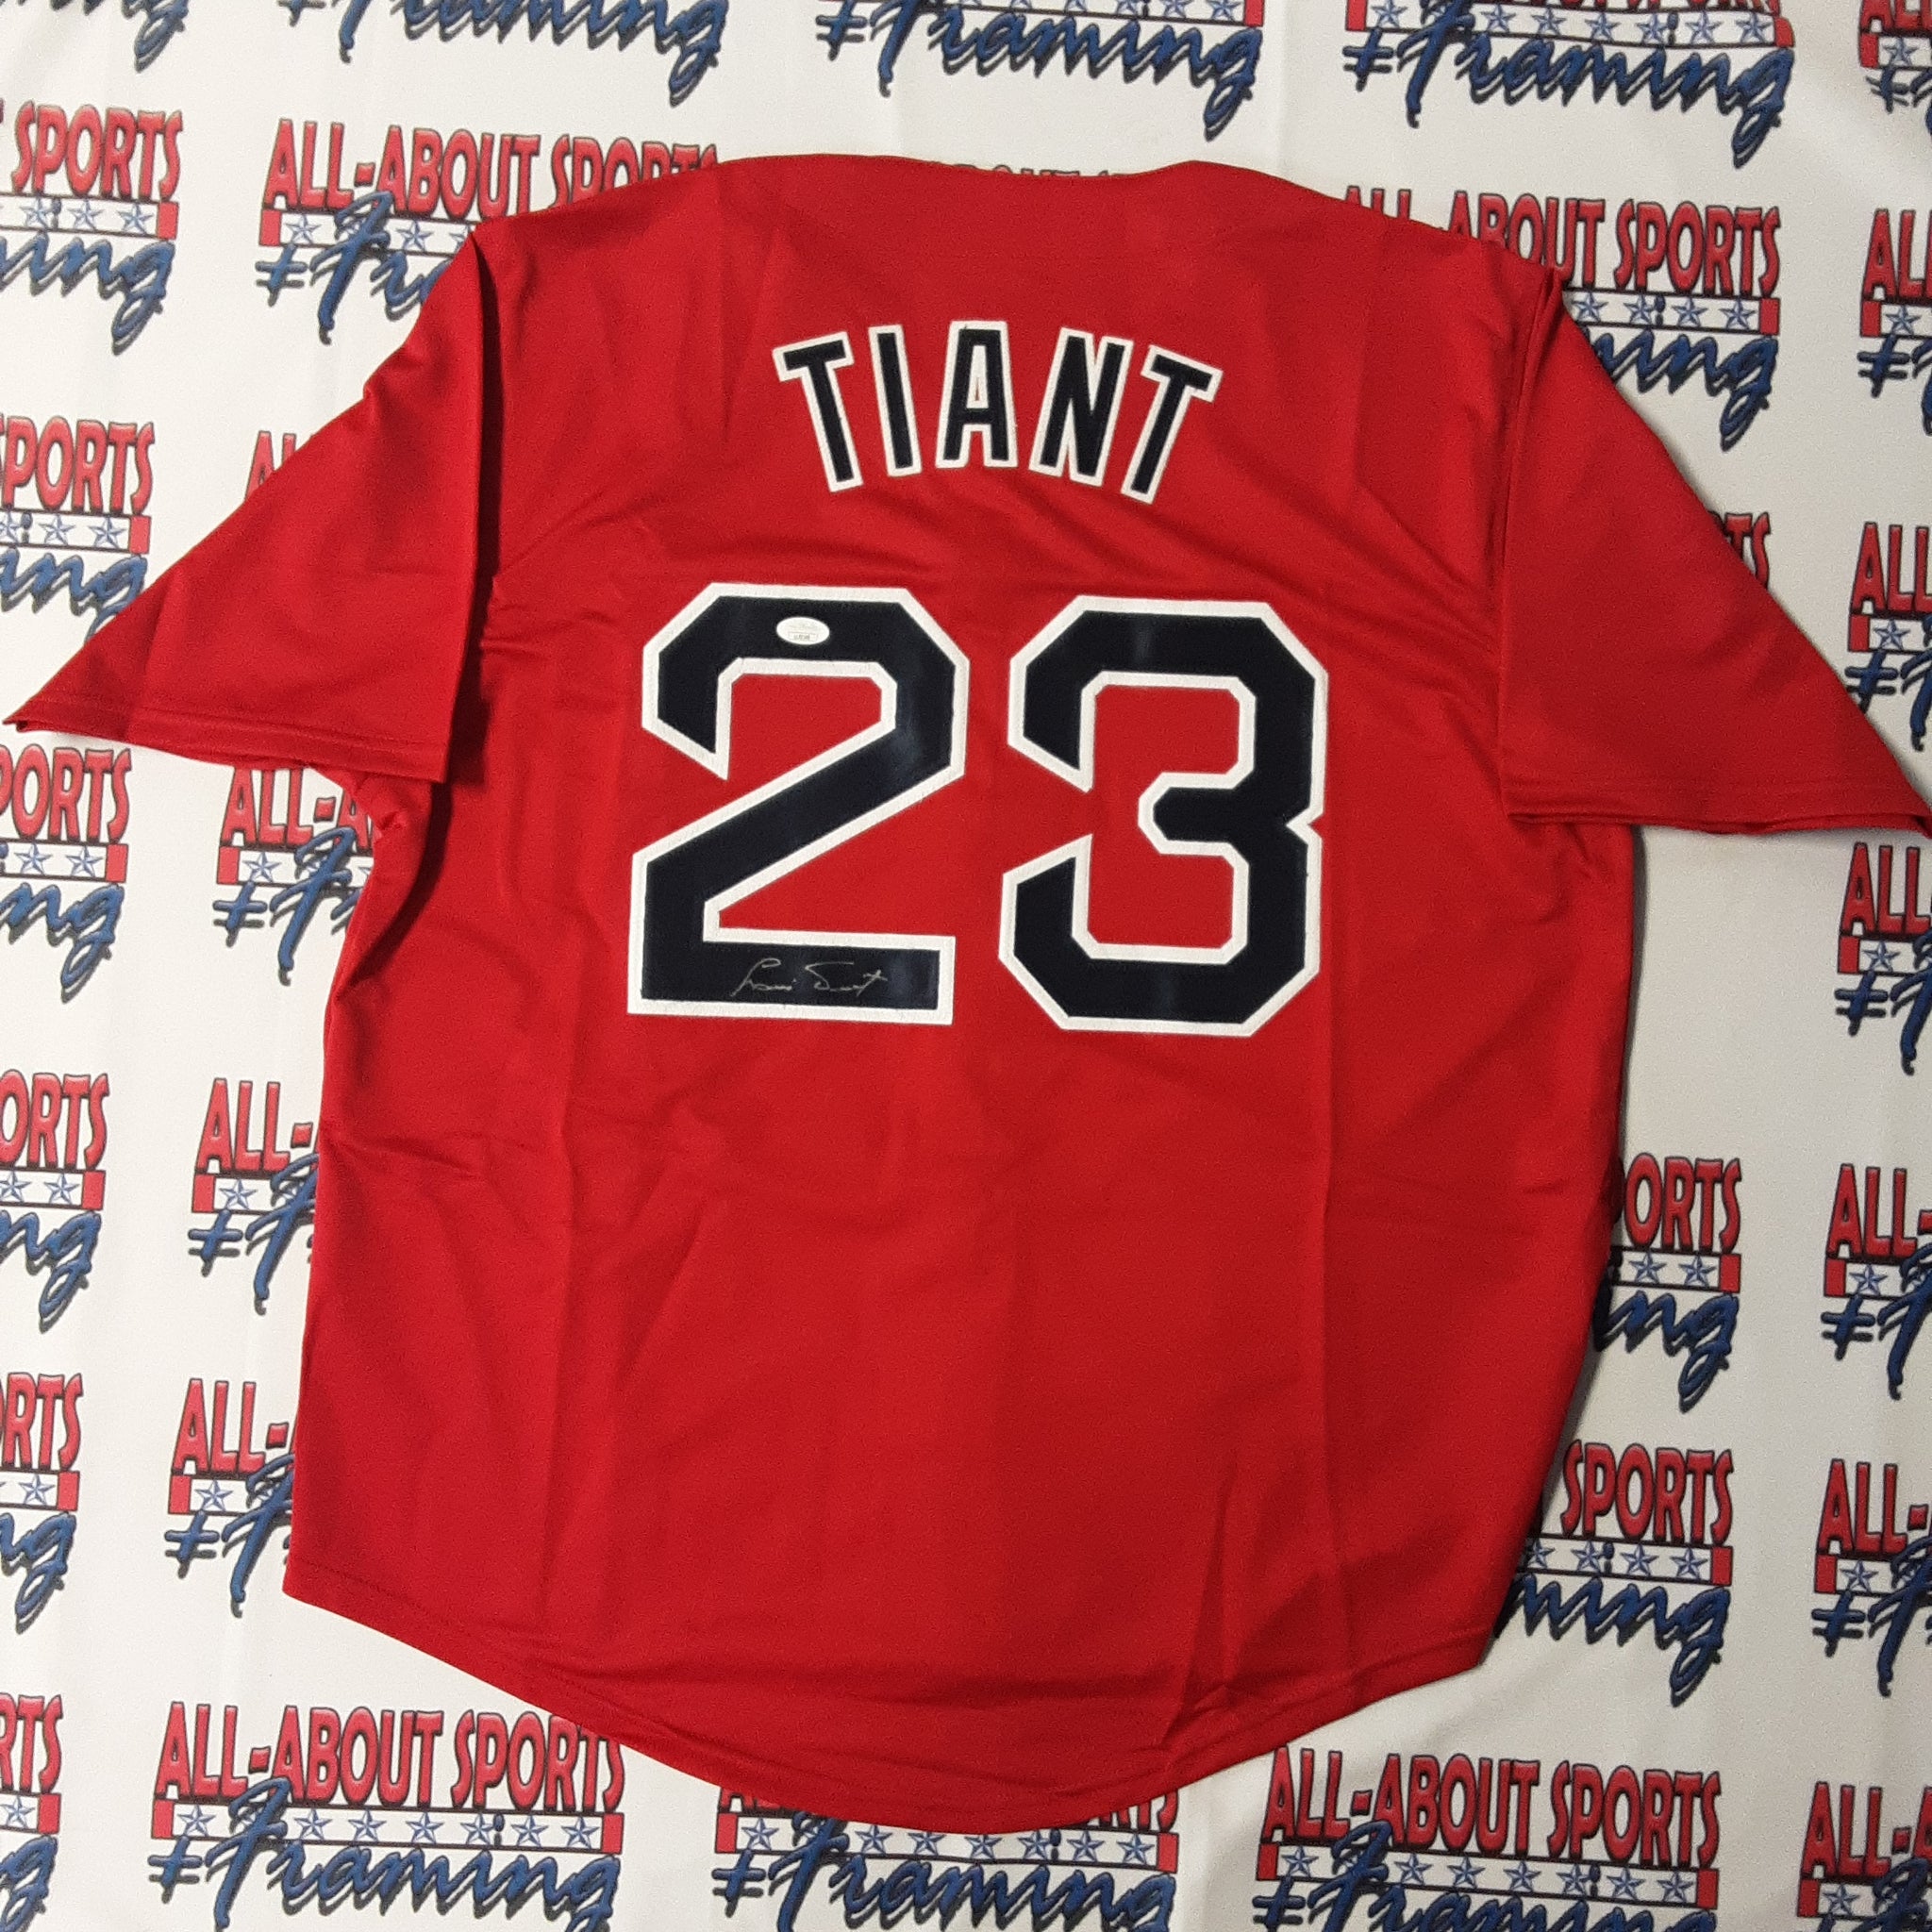 red sox autographed jersey